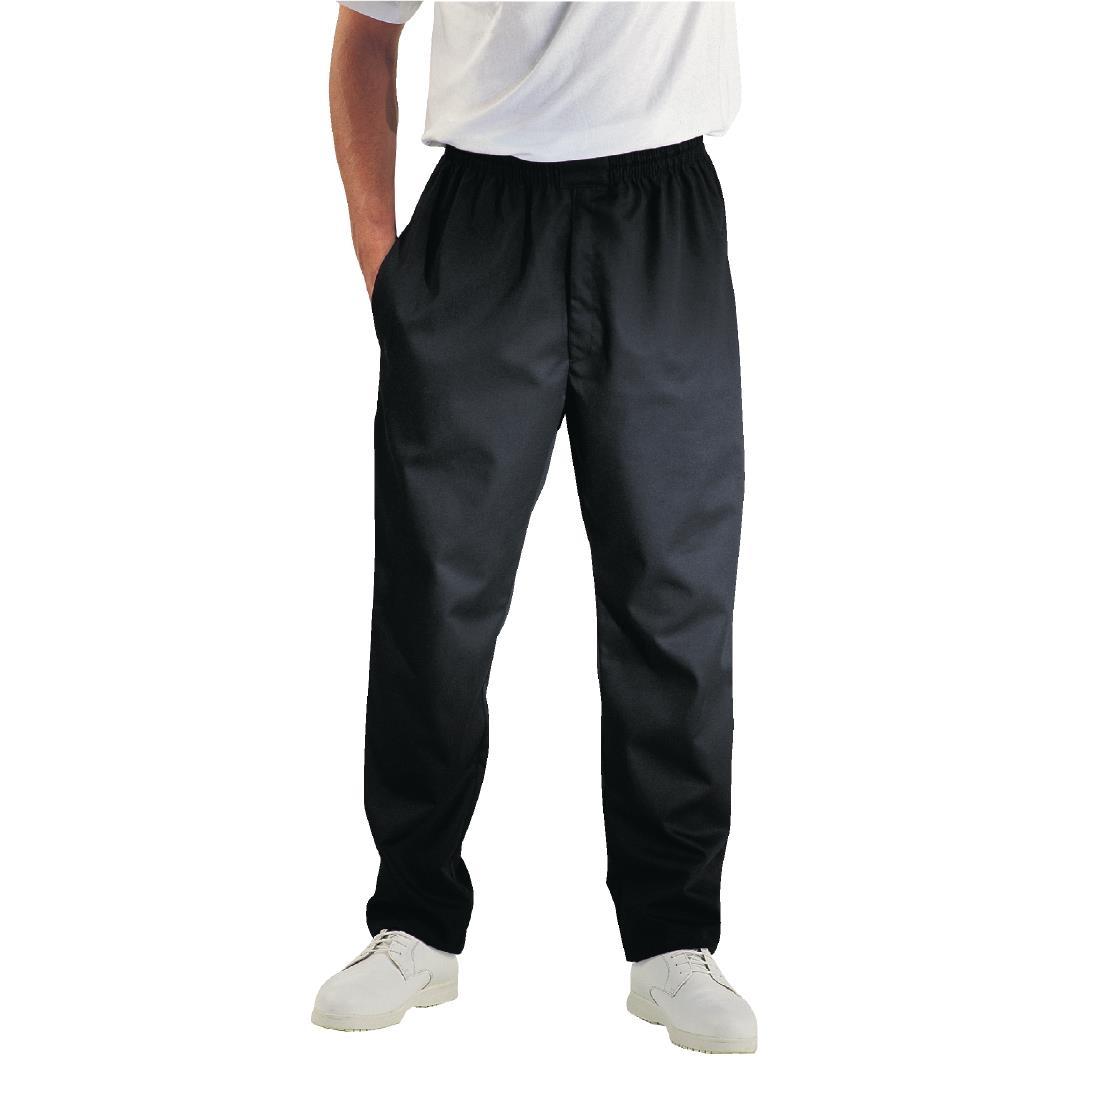 Chef Works Essential Baggy Trousers Black 3XL - A029-3XL  - 1